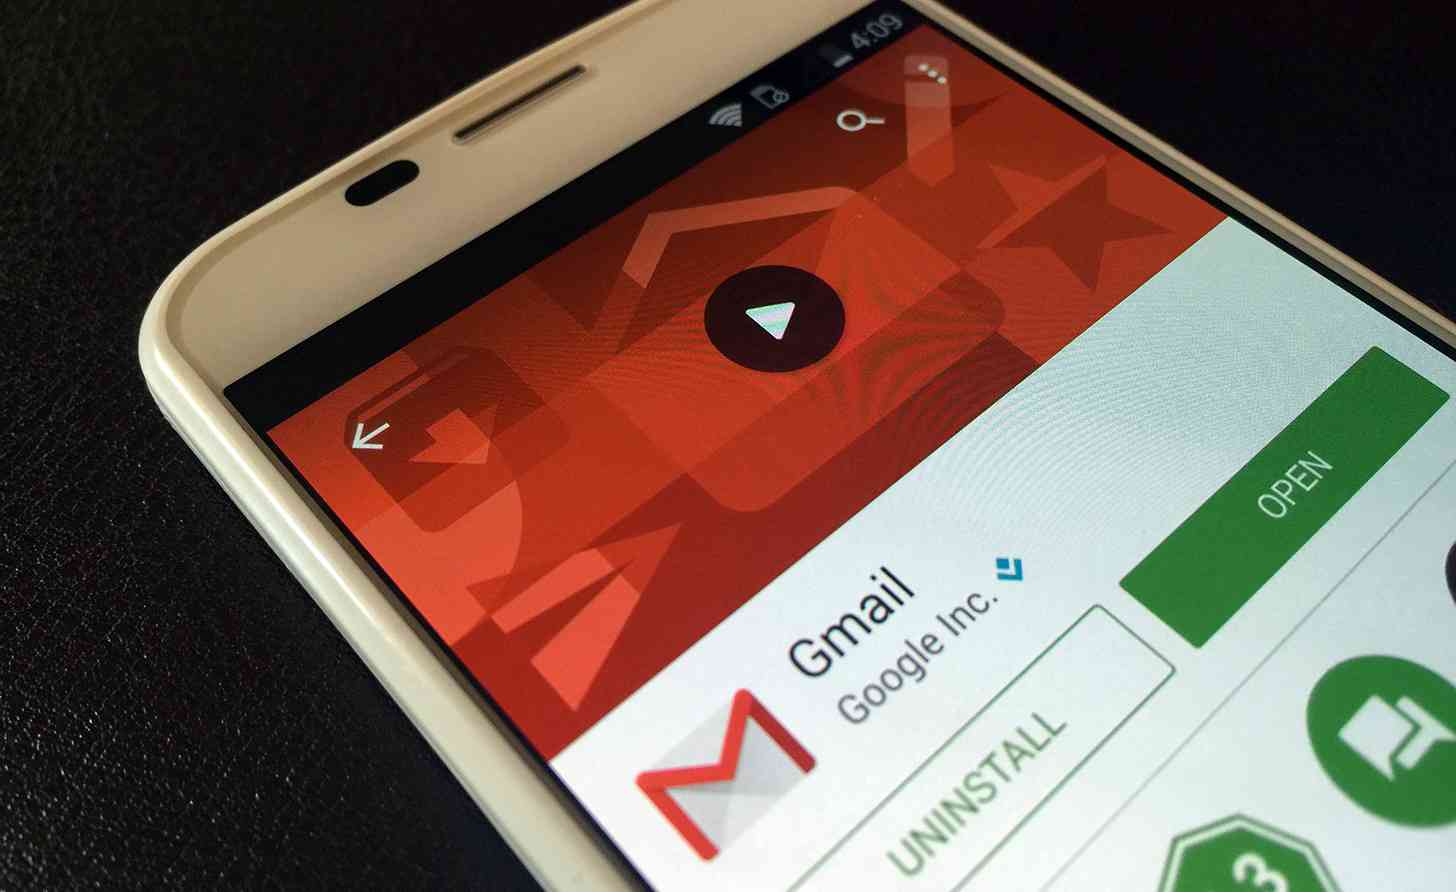 Gmail Android app